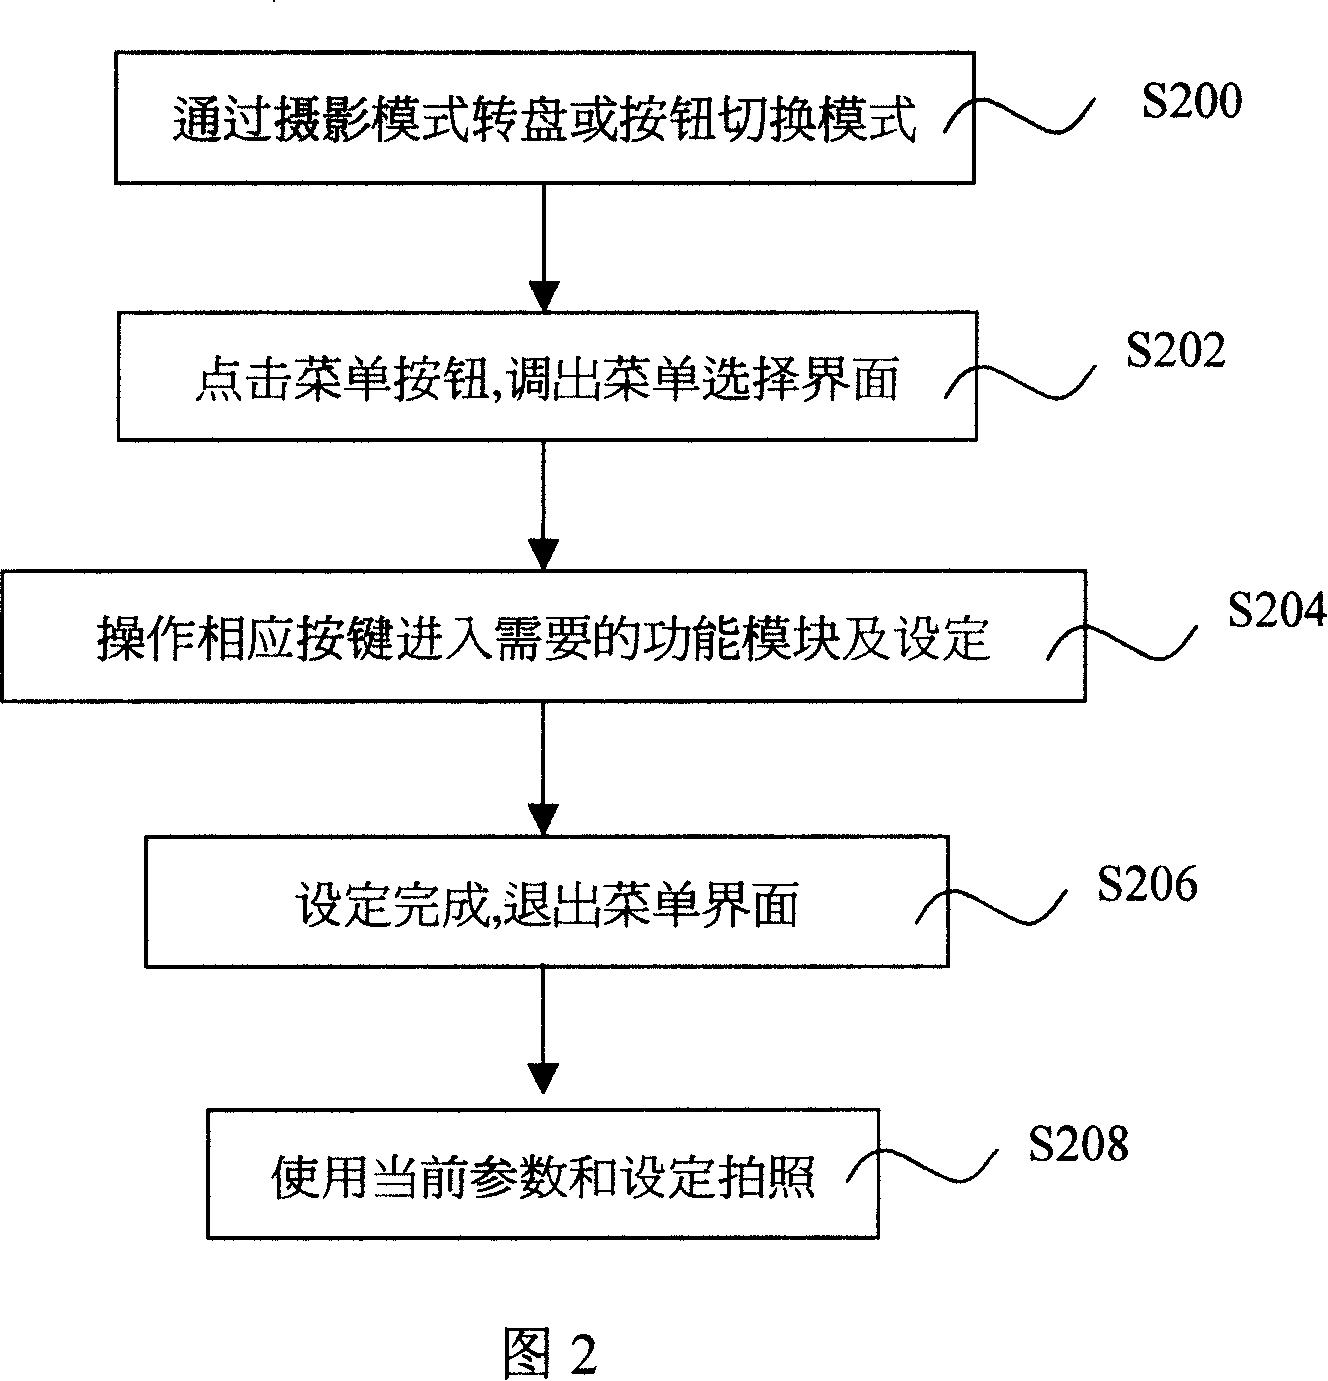 Method of performing pick-up image through fast switching combination of different pick-up parameters